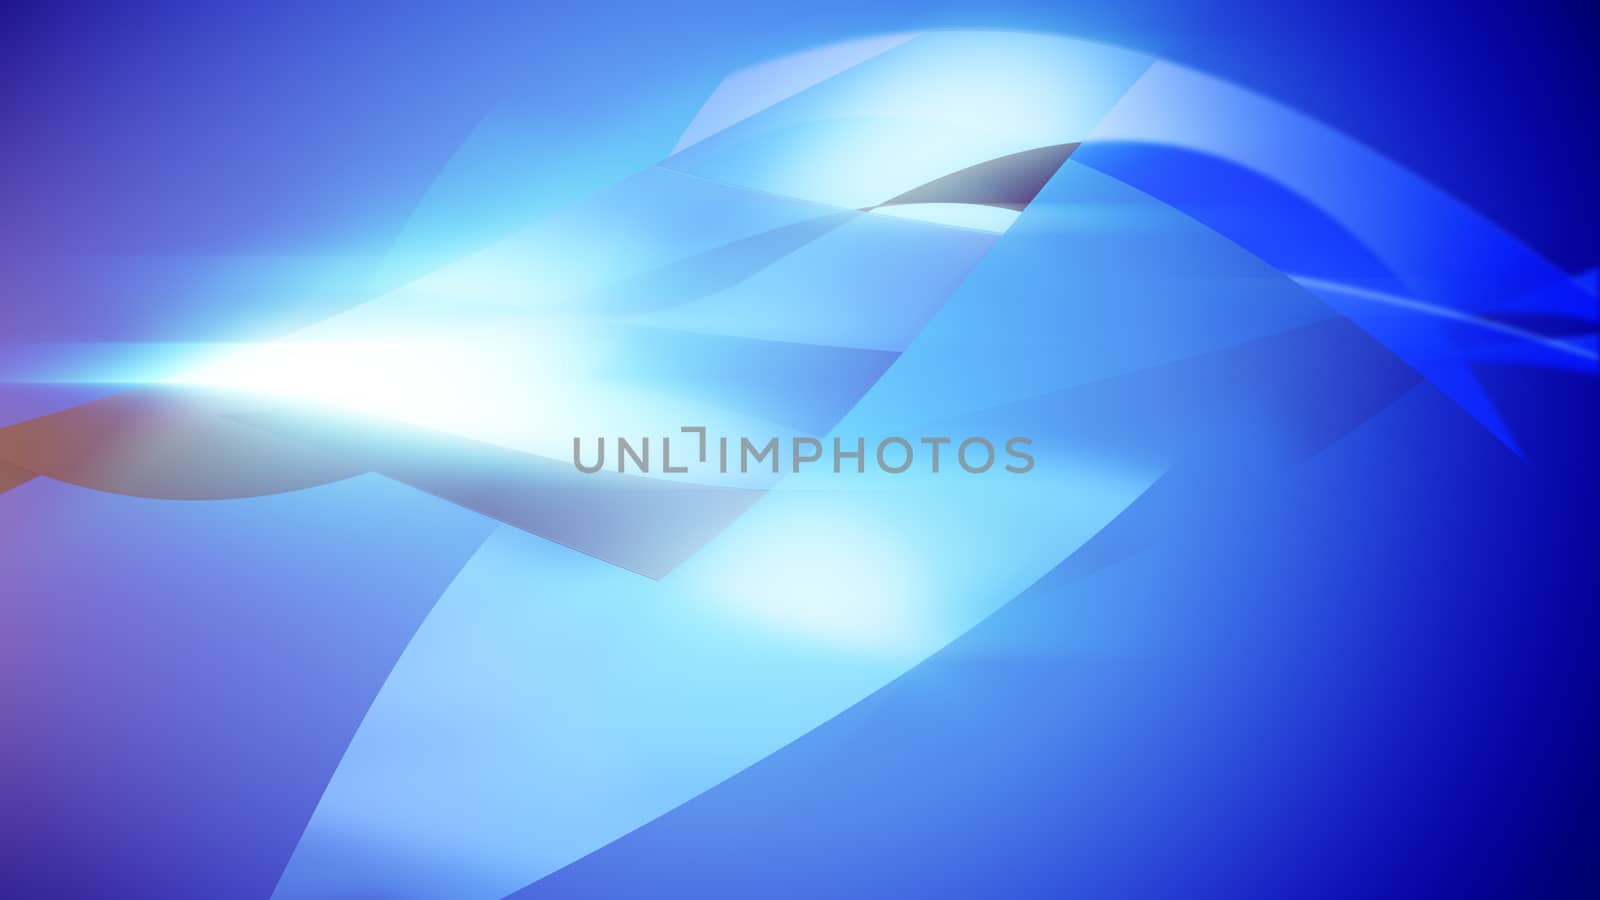 3d illustration with beautiful glowy bended blue line elements on a blue background